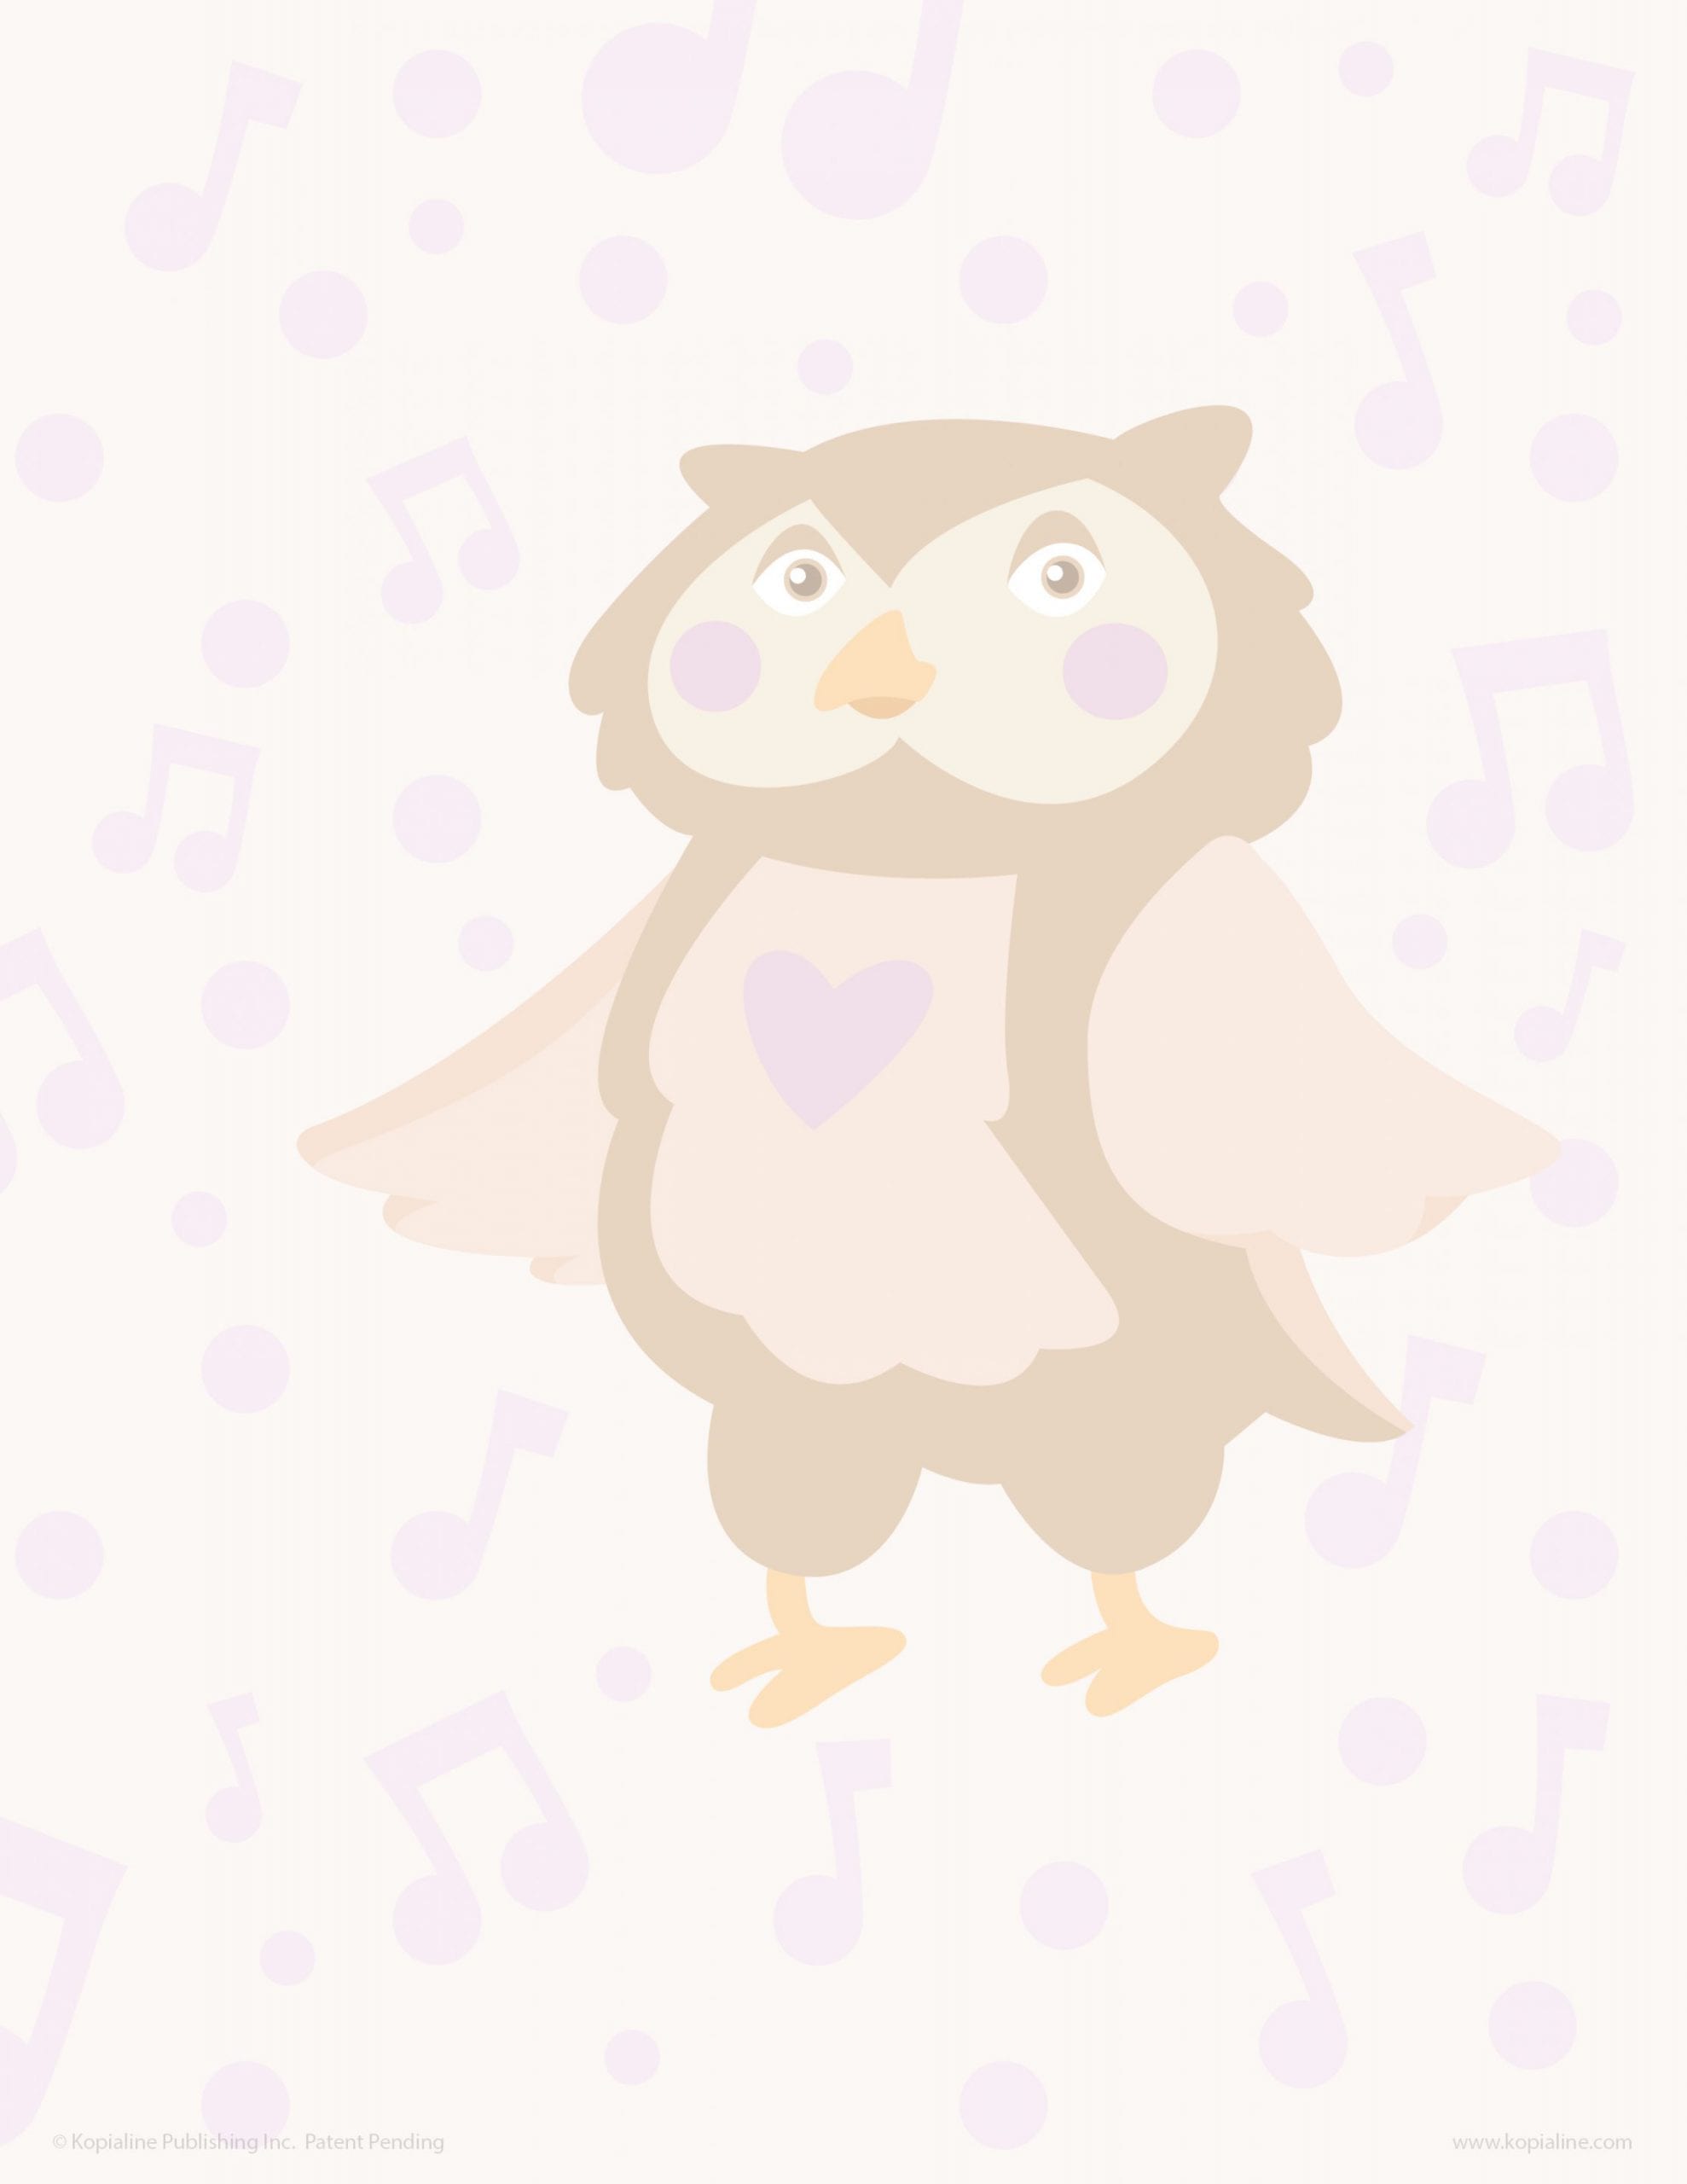 Practice Drawing Learn to Draw The Love Owl Kopiography